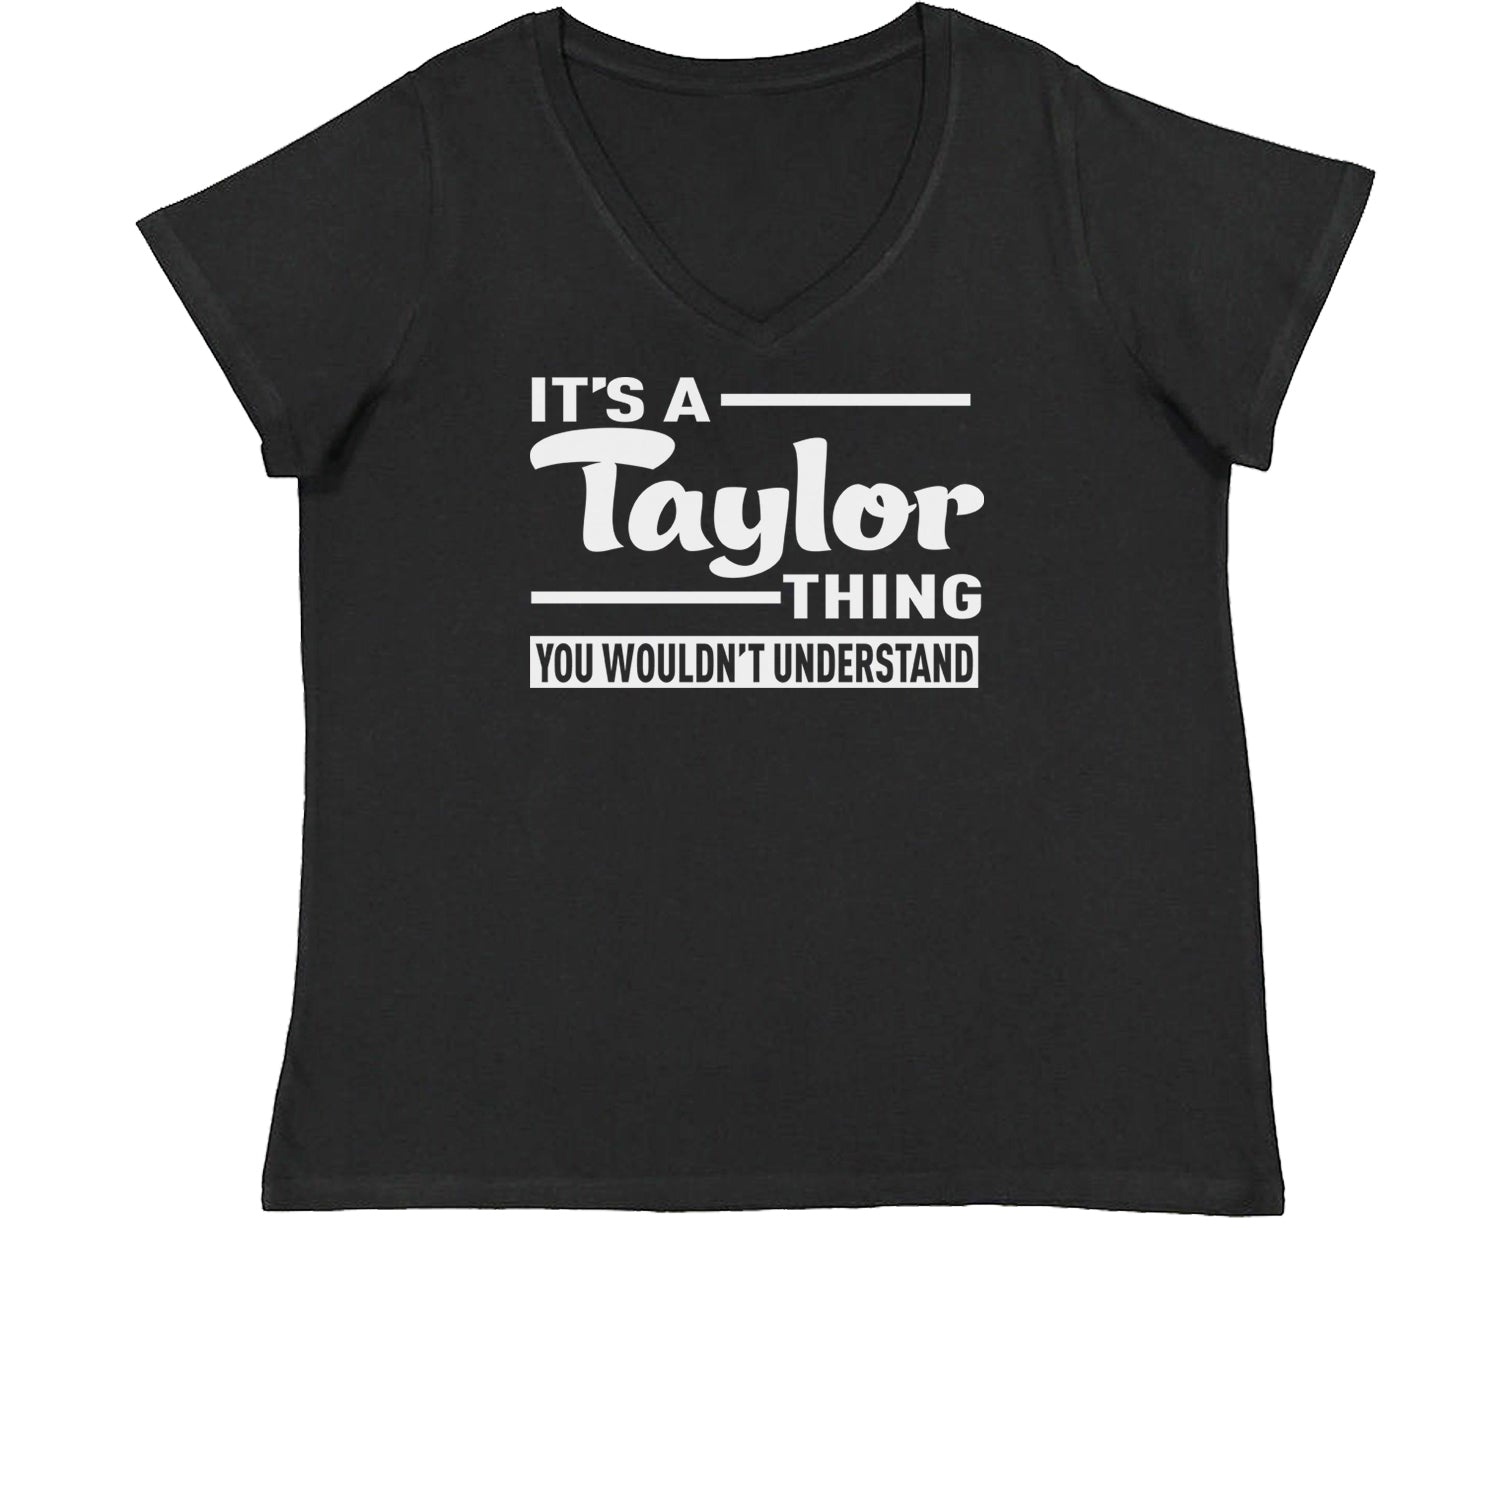 It's A Taylor Thing, You Wouldn't Understand Womens Plus Size V-Neck T-shirt nation, taylornation by Expression Tees